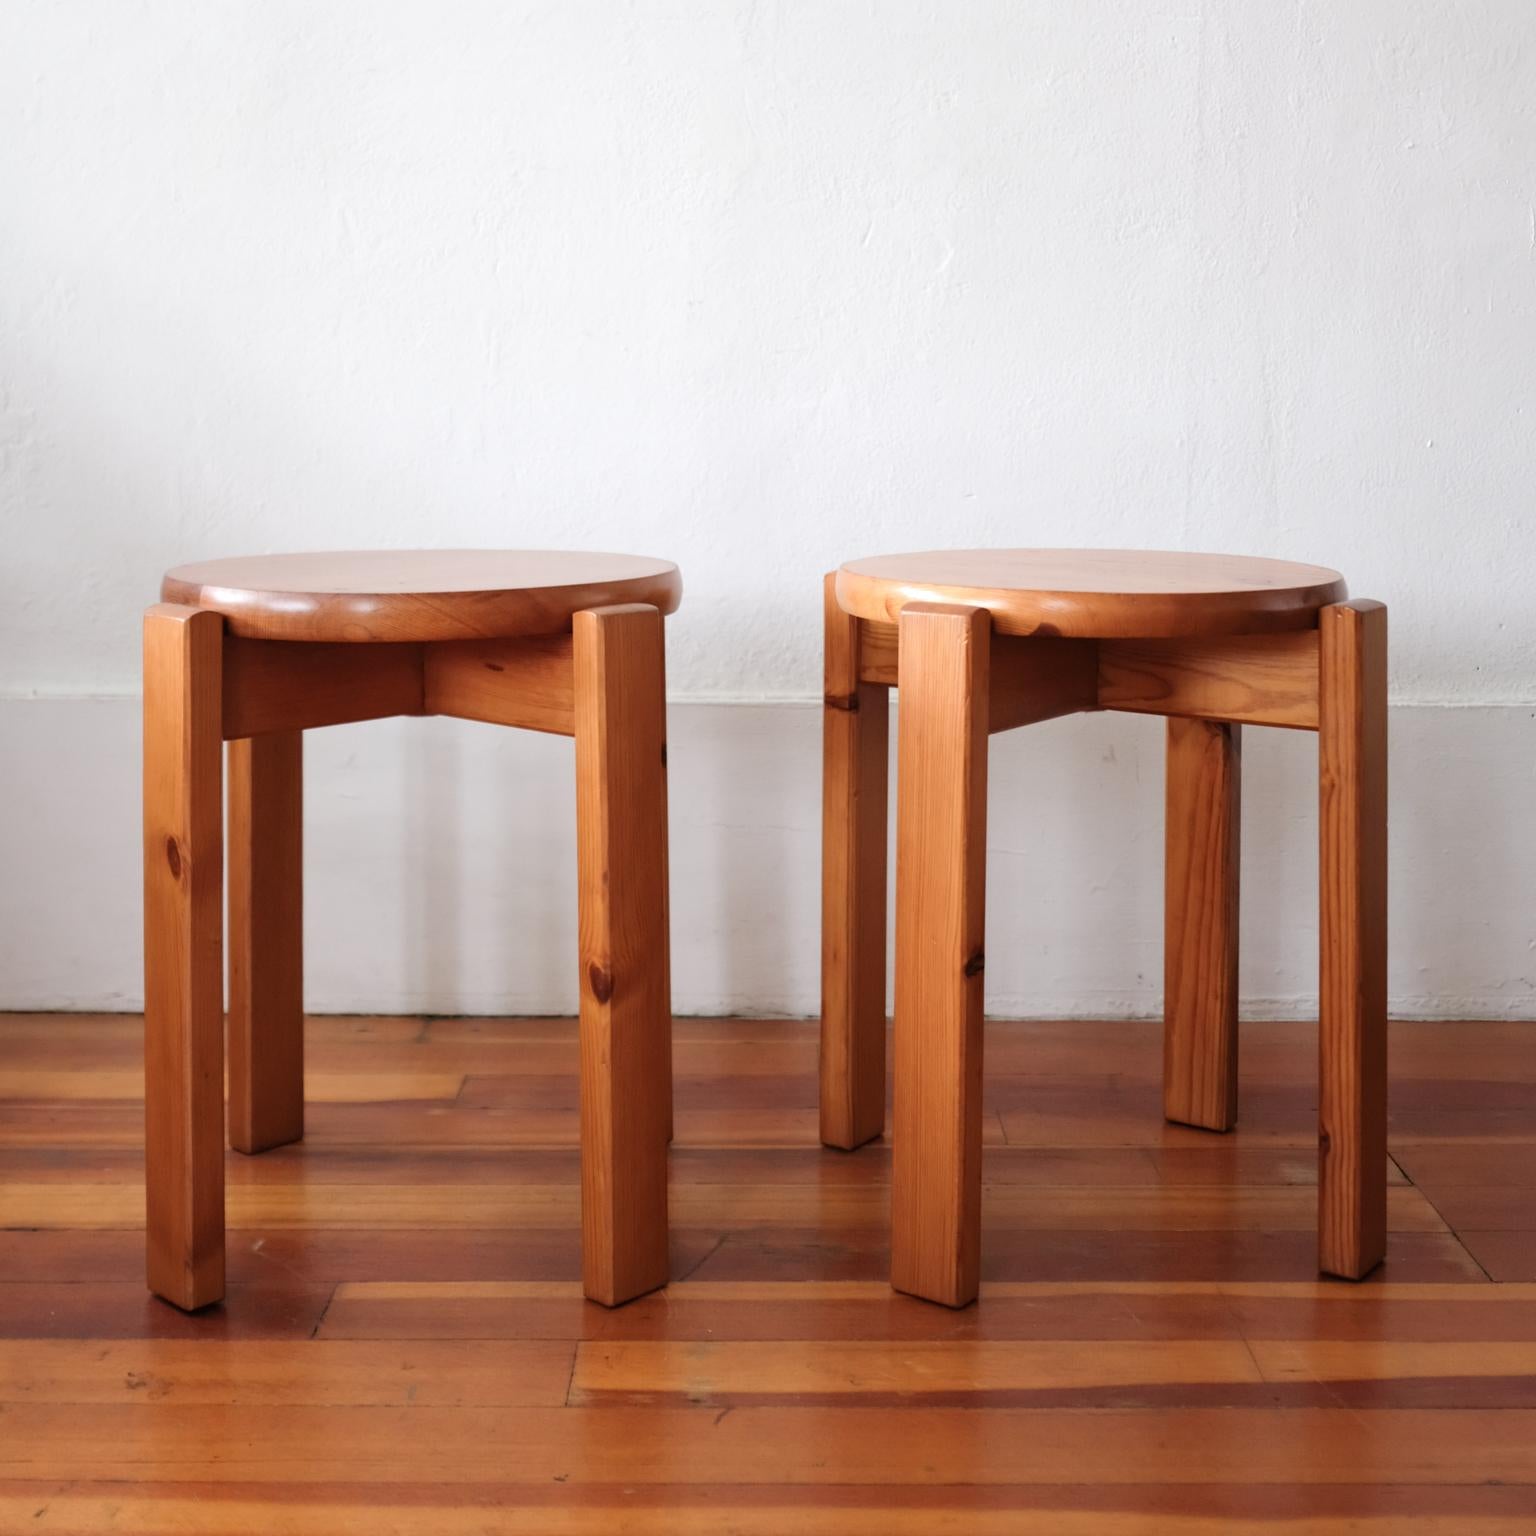 Unknown Pair of Minimalist Pine Side Tables or Stools, 1960s